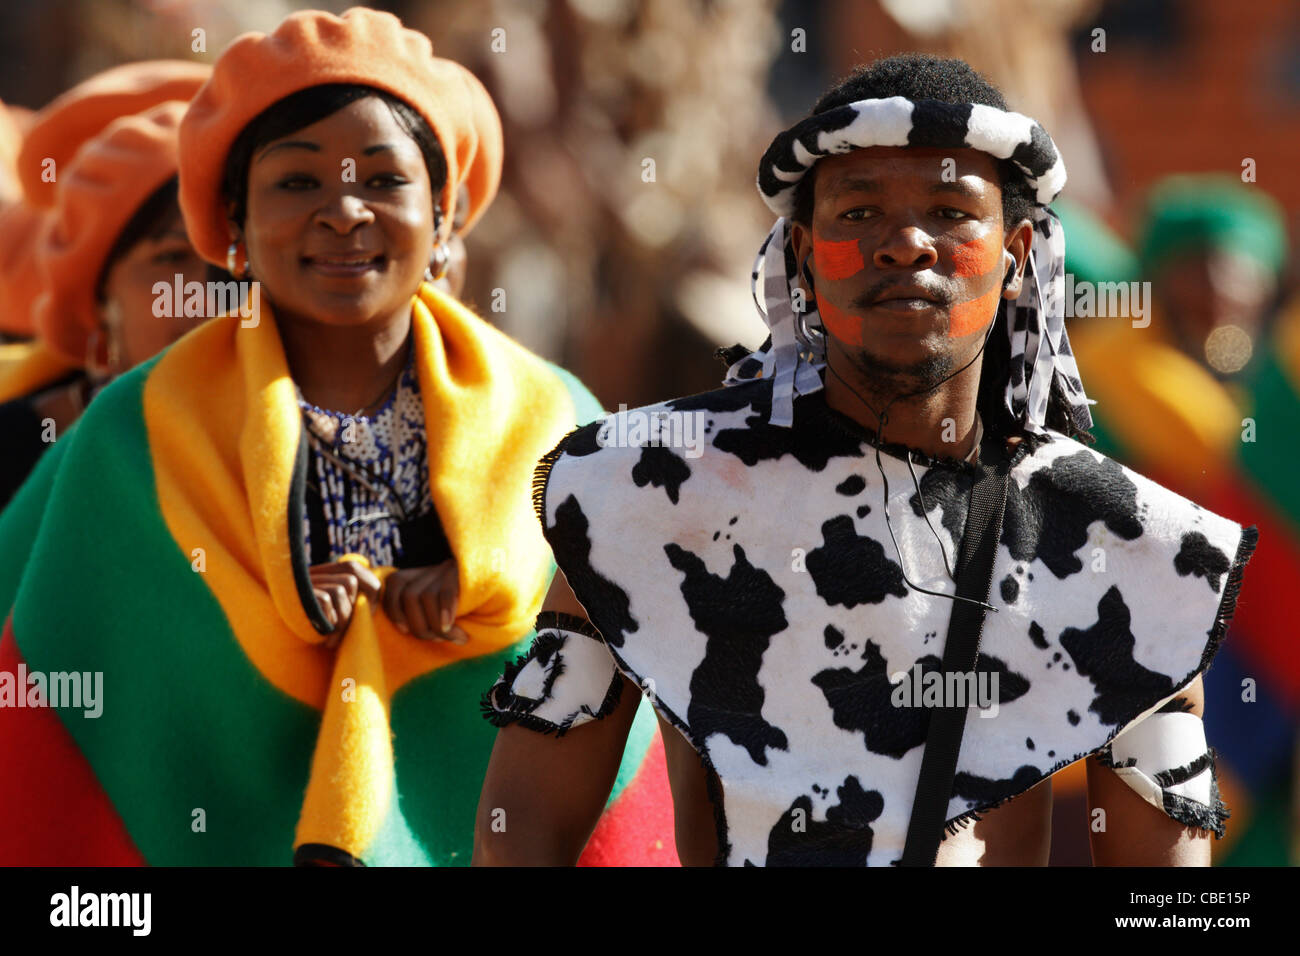 Traditionally clothed men and women perform at the opening ceremony of the 2010 FIFA World Cup soccer tournament in South Africa Stock Photo